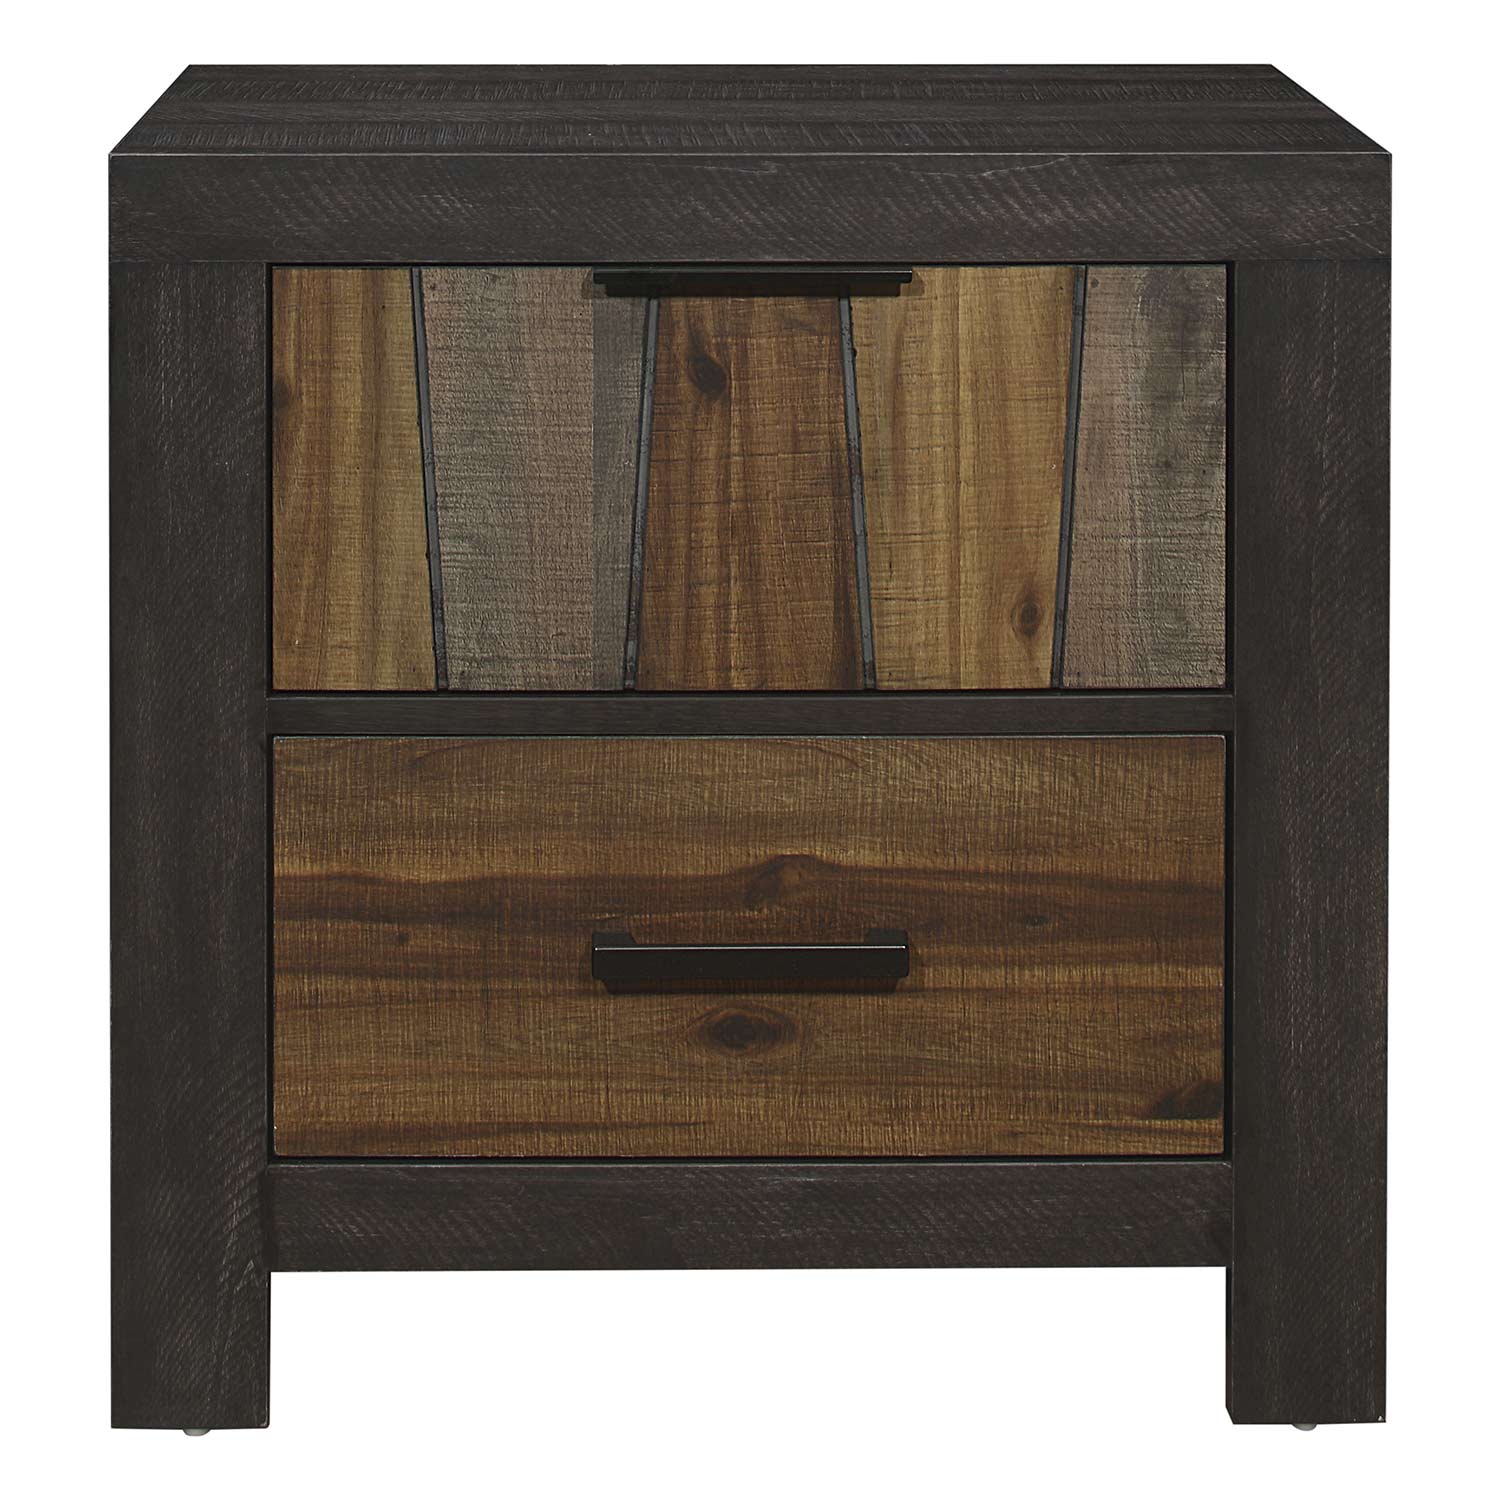 Homelegance Cooper Night Stand - Wire-brushed multi-tone